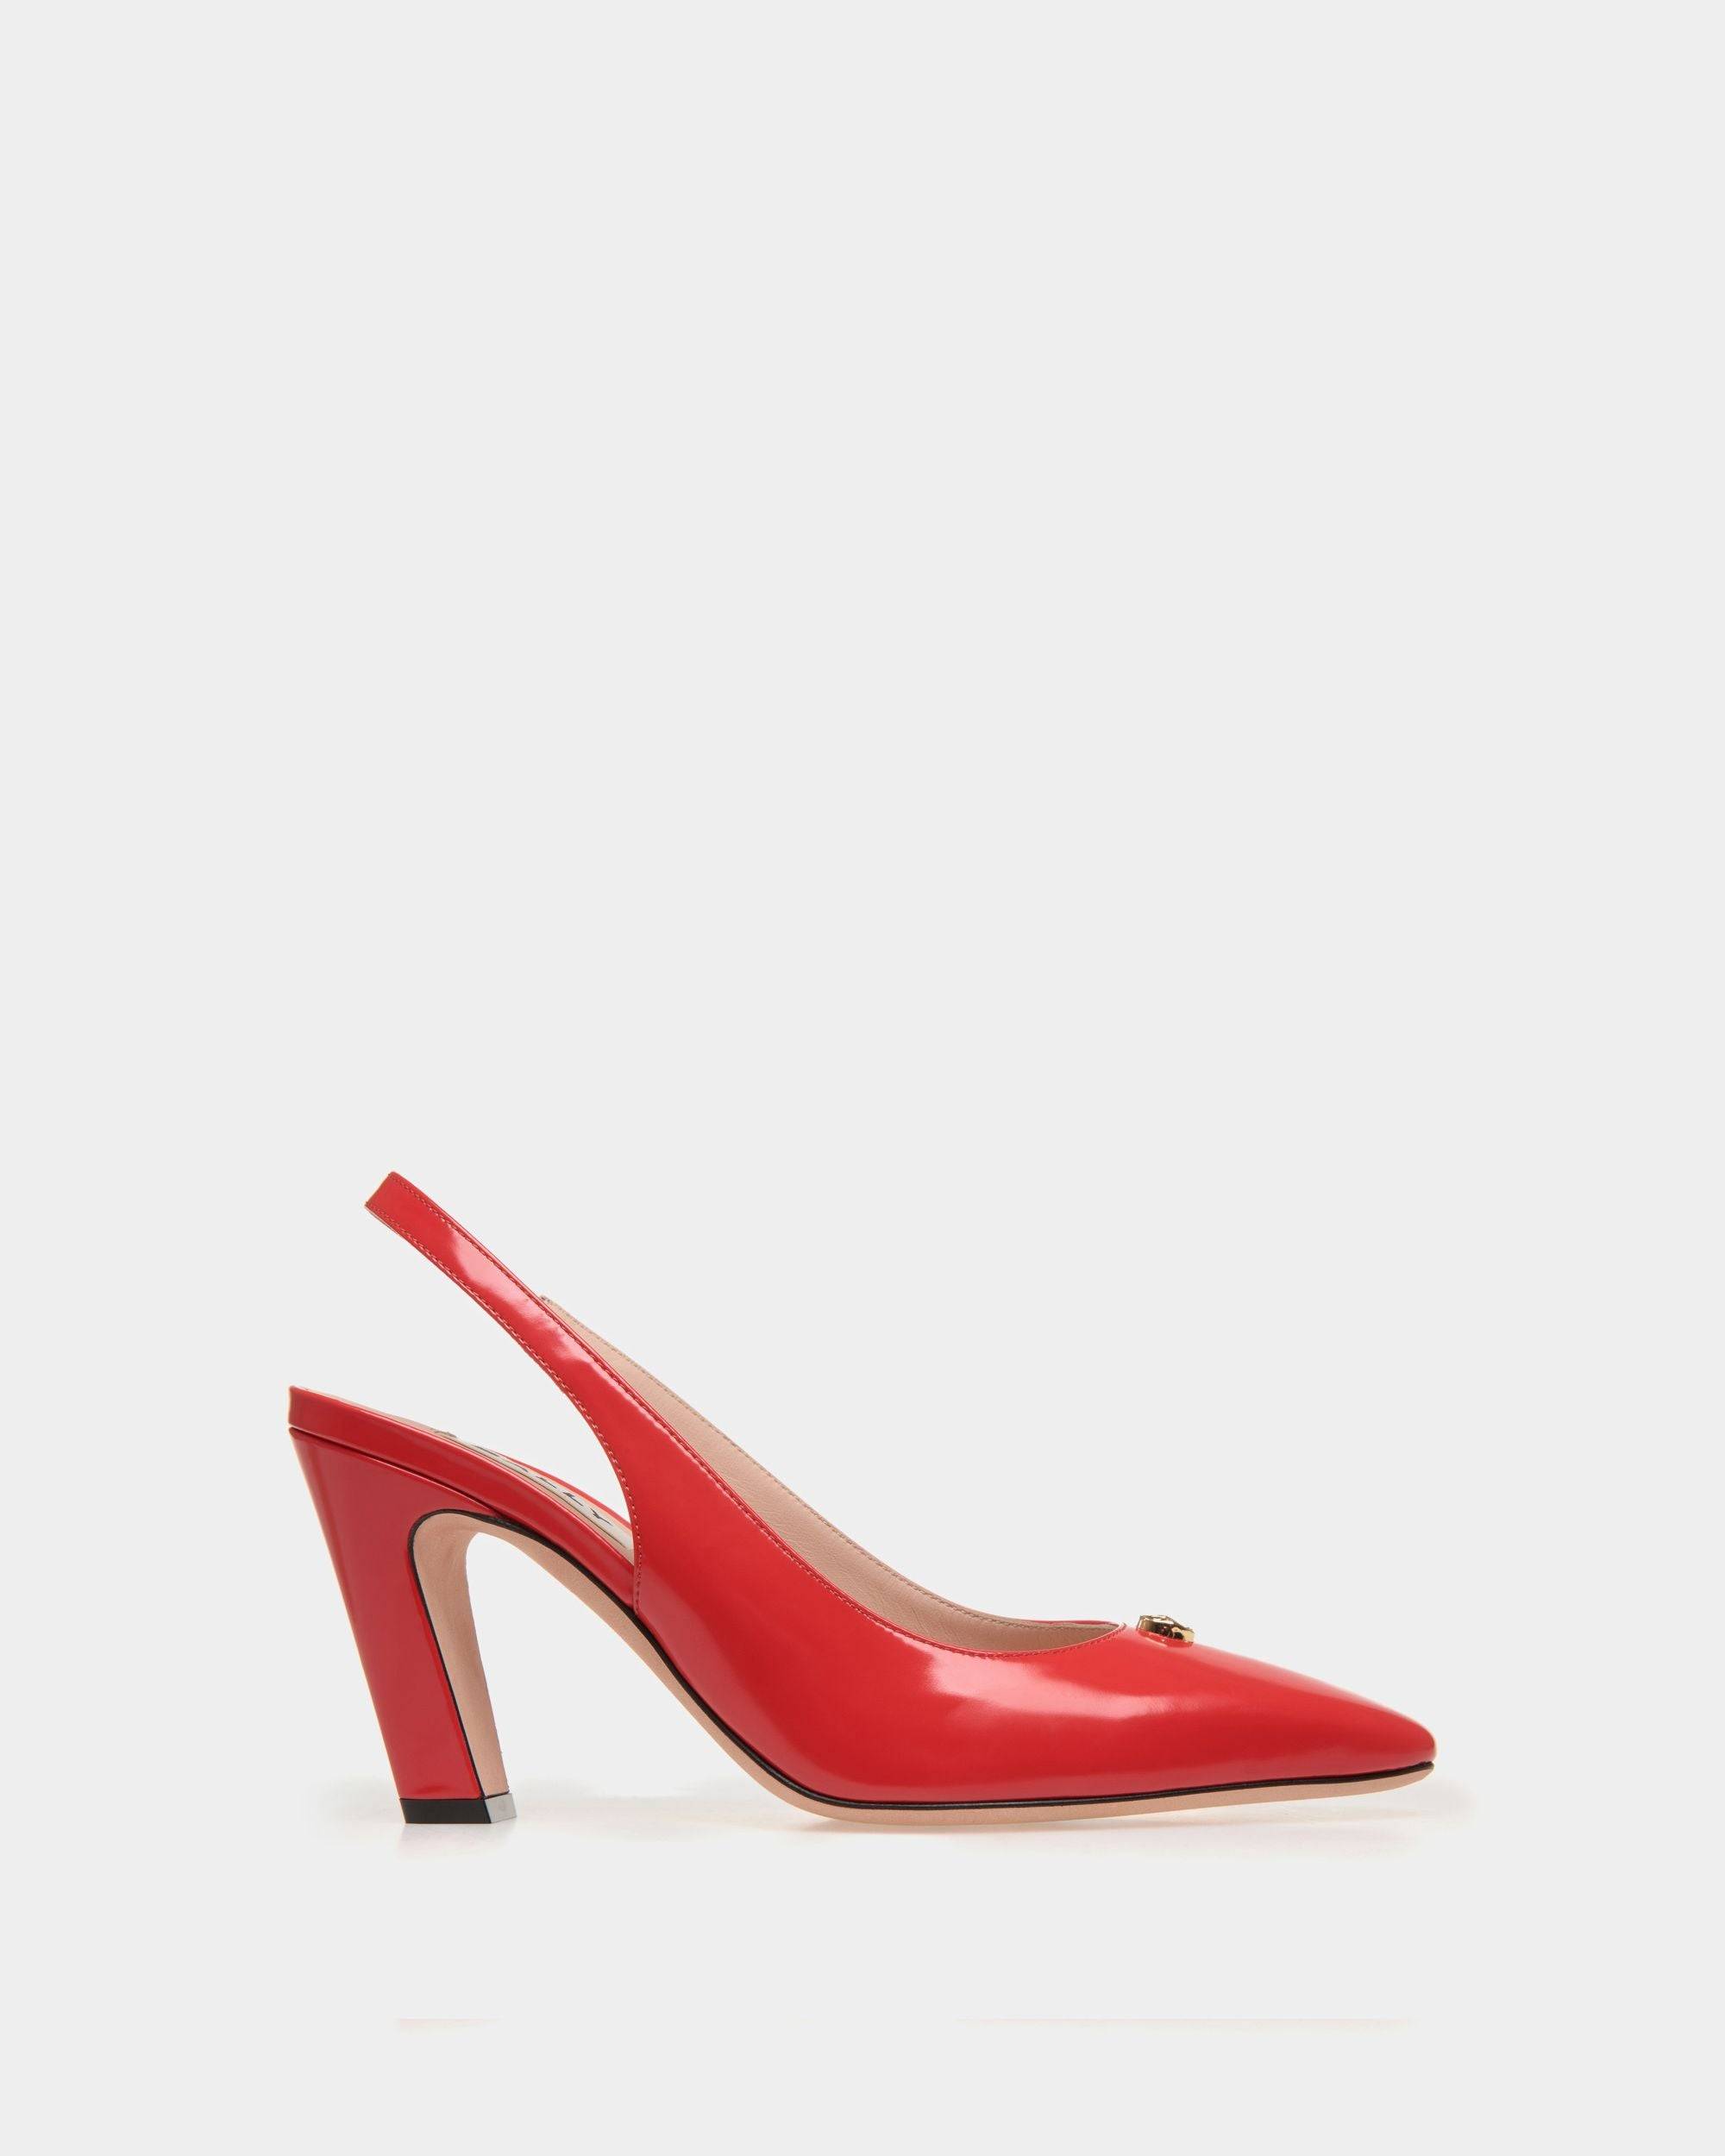 Women's Sylt Slingback Pump In Red Leather | Bally | Still Life Side